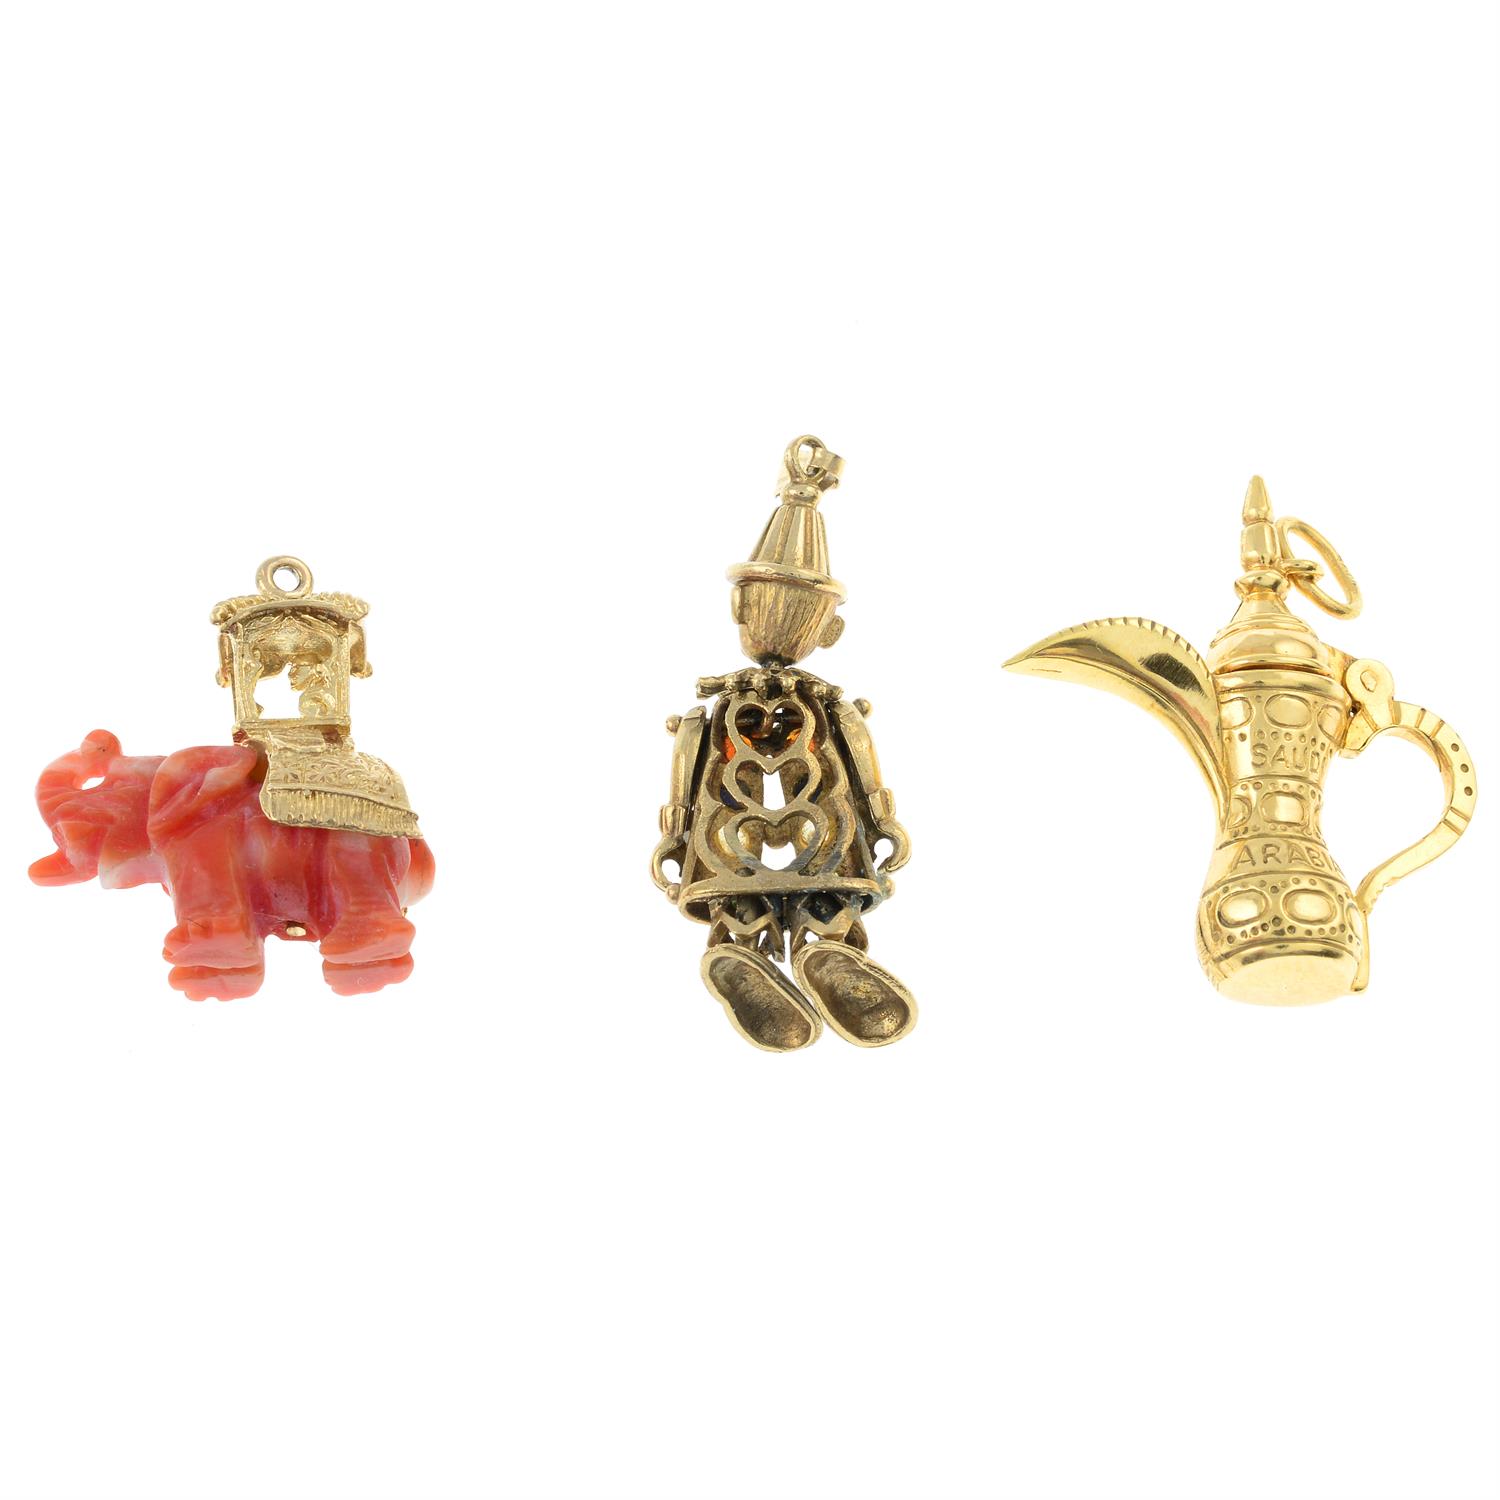 Two 9ct gold gem-set charms and a aftaba charm. - Image 2 of 2